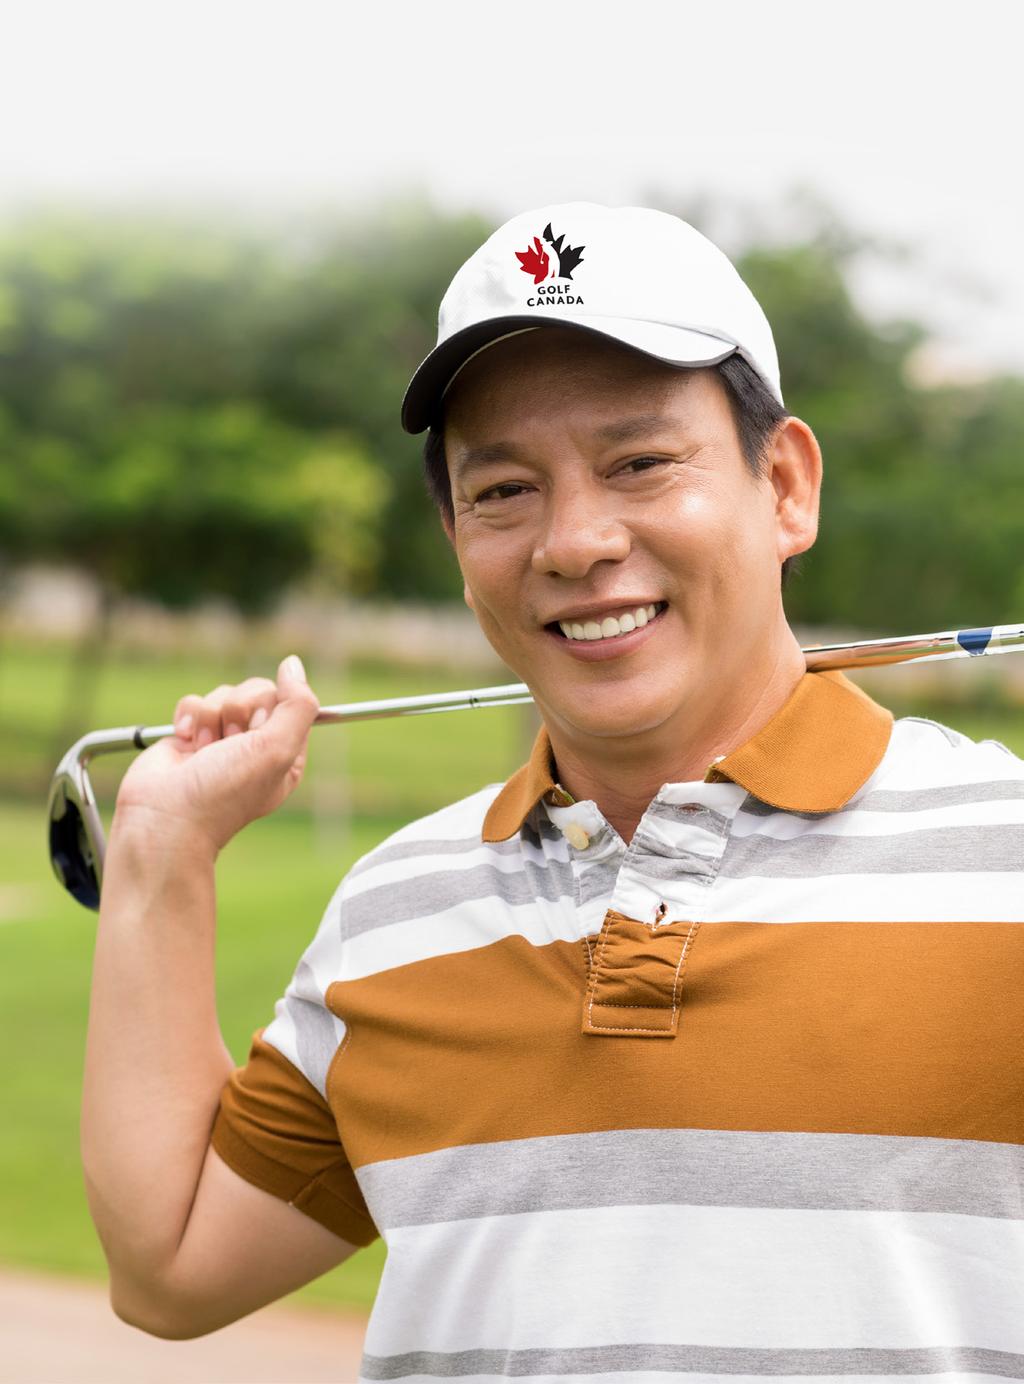 Golfer Benefits Event Tickets & Merchandise Special Offers Golf Canada members enjoy discounts on golf equipment, apparel and accessories throughout the season and have access to special members only